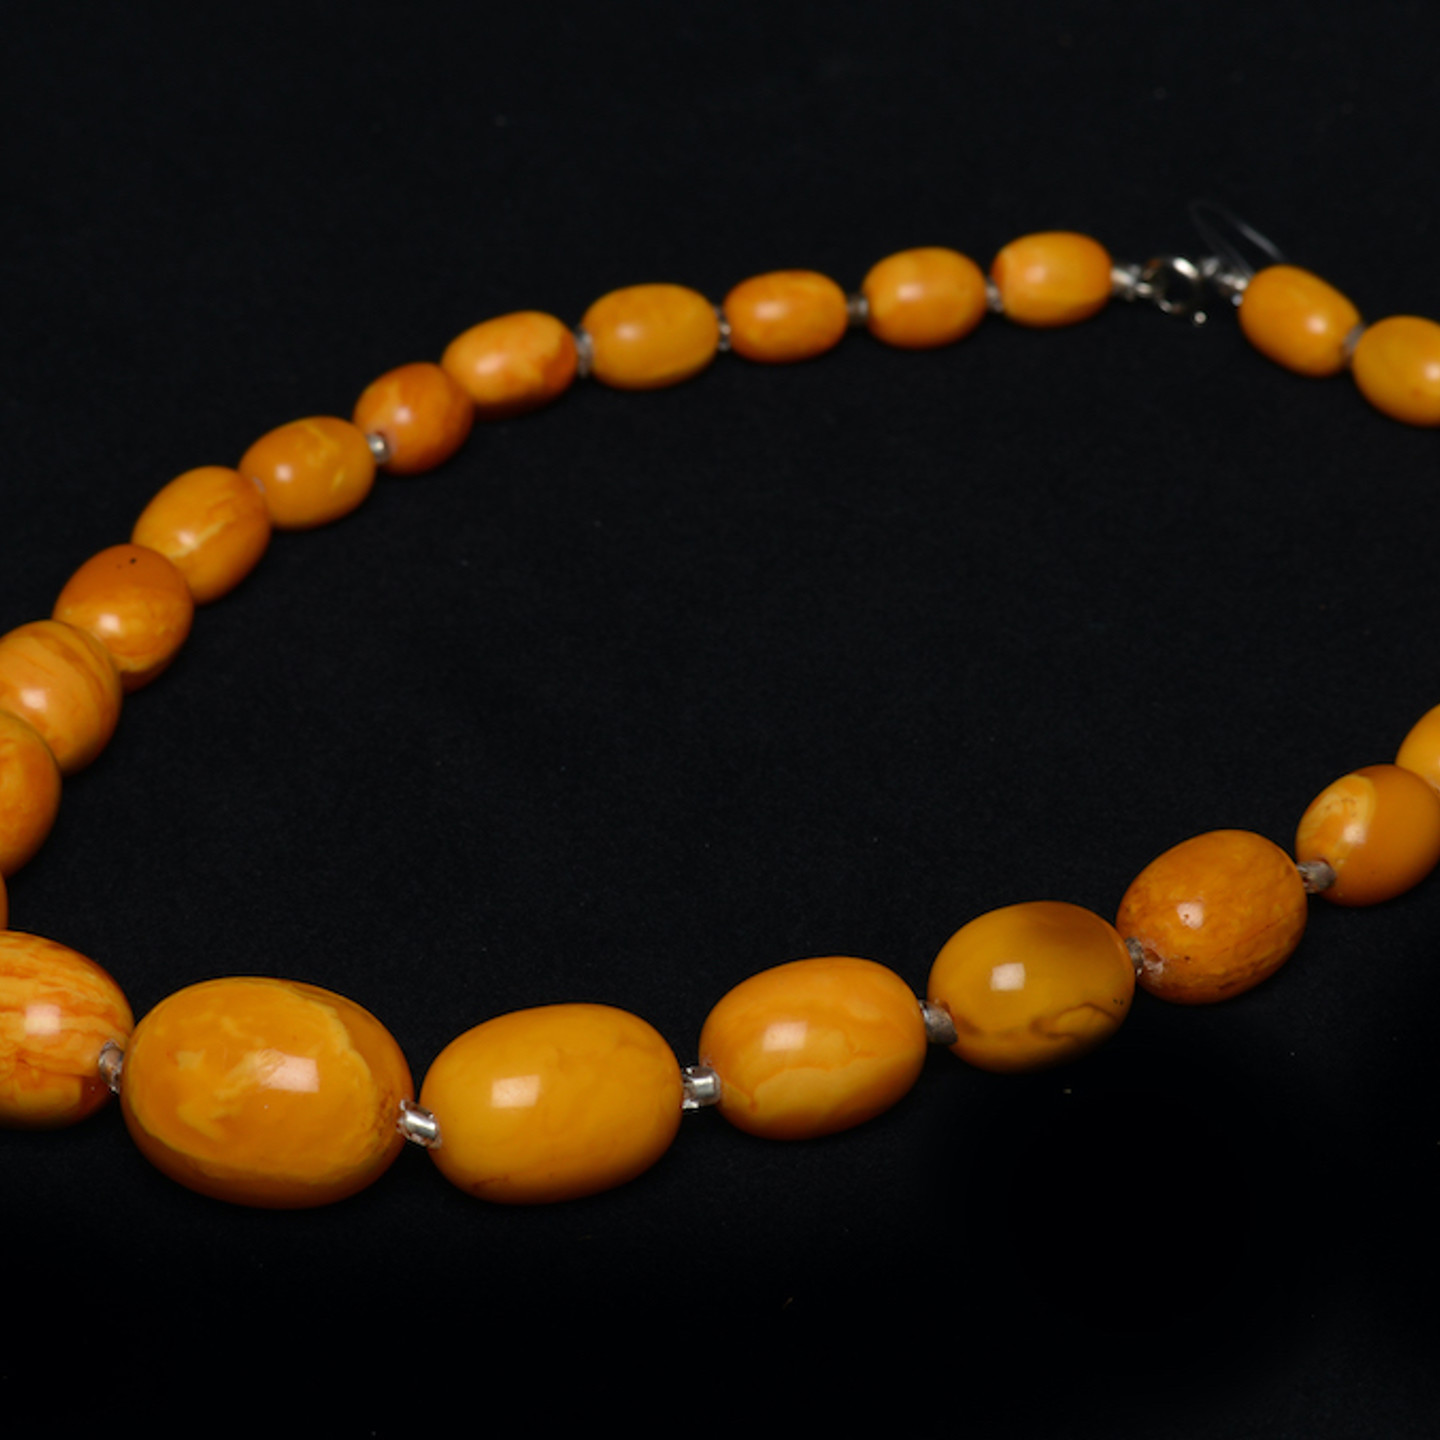 A Baltic Amber Necklace. Sold For £9000